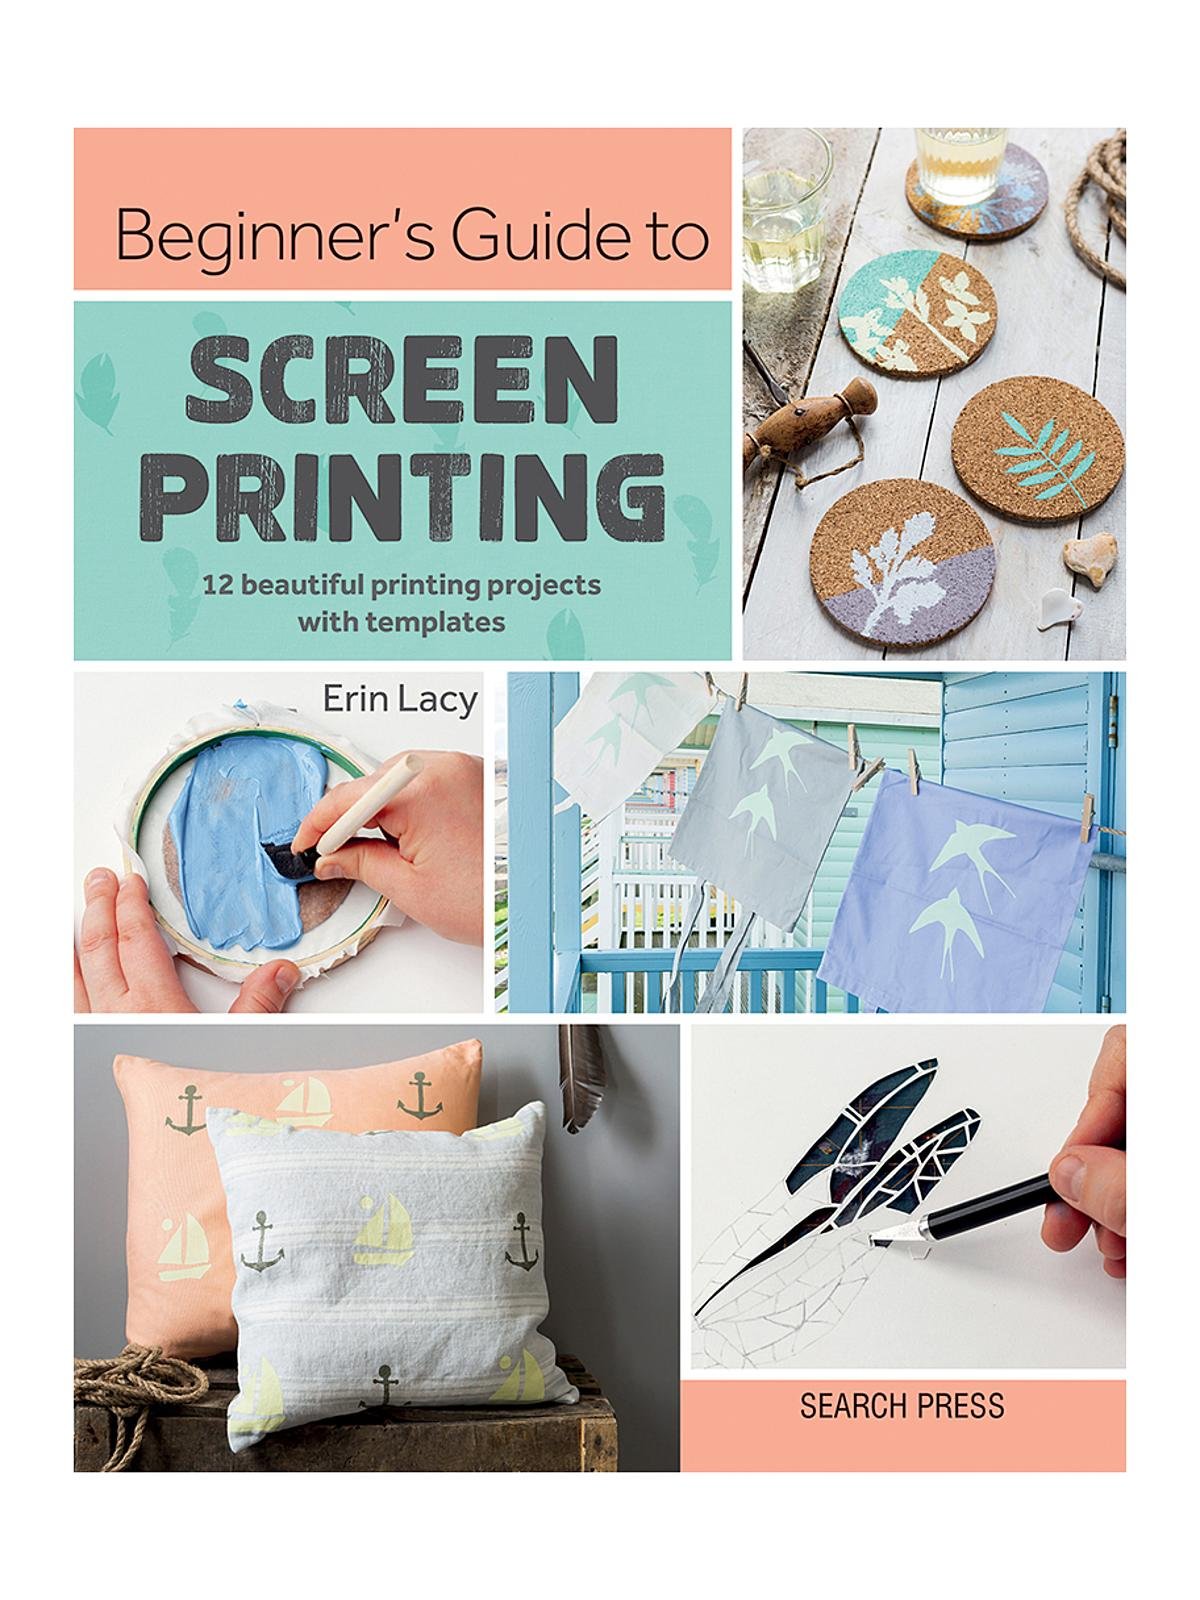 Search Press - Beginner's Guide to Screen Printing